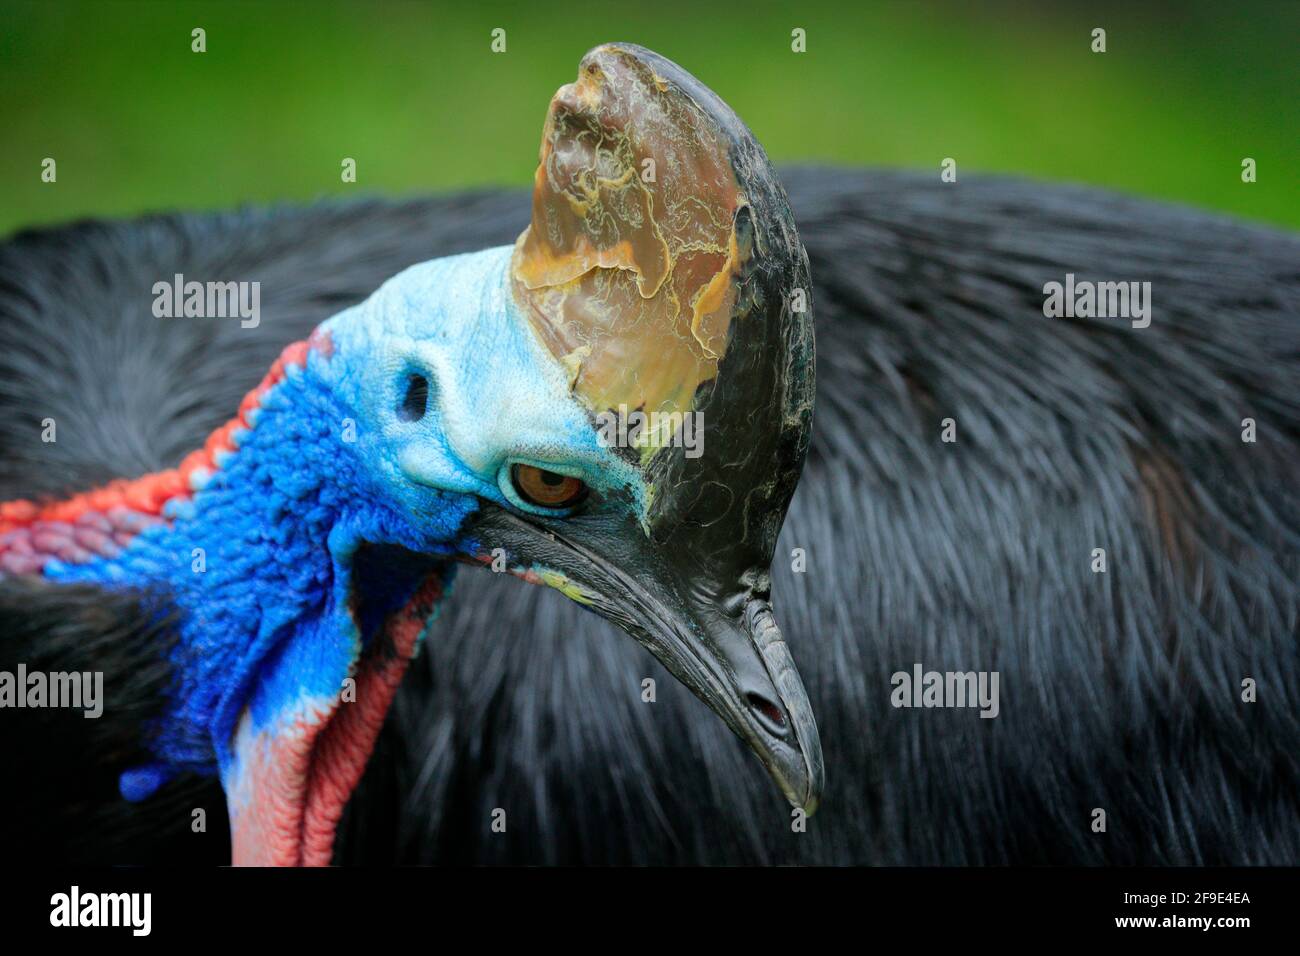 Anzai Lydighed gys Detail portrait of Southern cassowary, Casuarius casuarius, known as  double-wattled cassowary. Australian big forest bird from Papua New Guinea  Stock Photo - Alamy